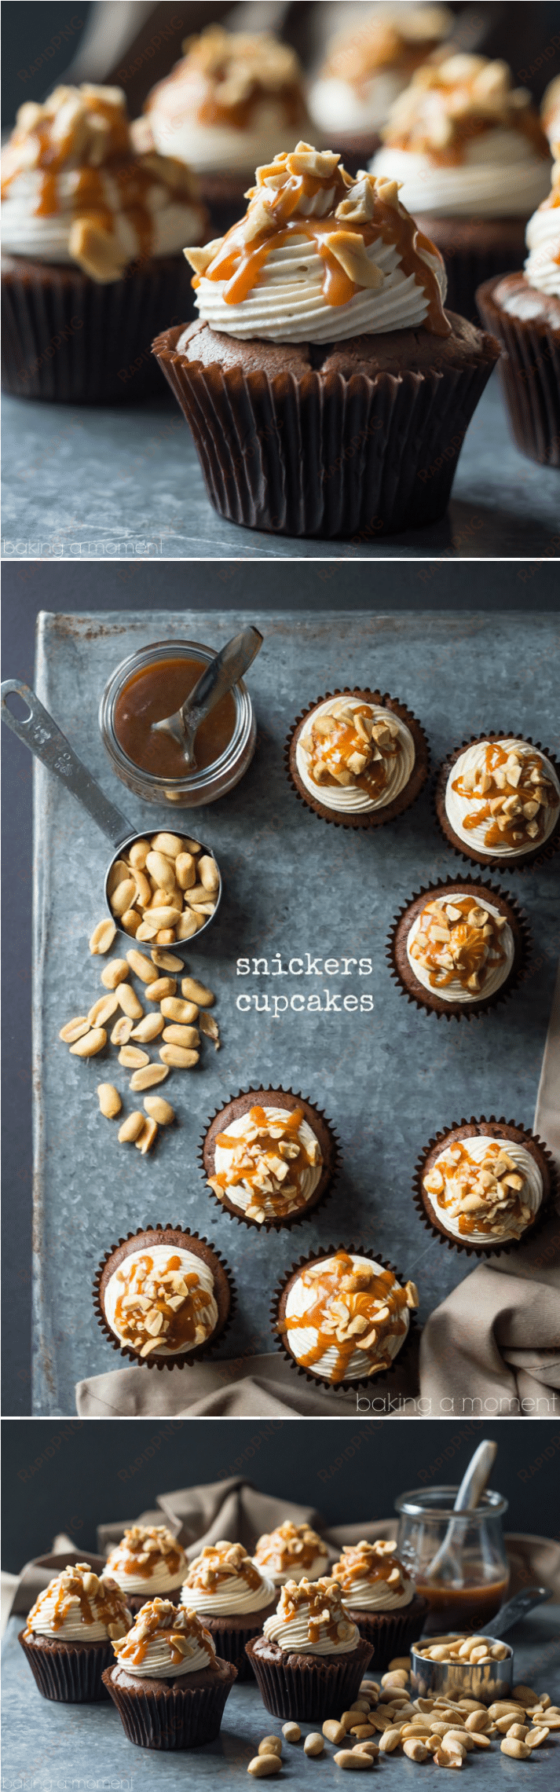 snickers cupcakes- best ever chocolate cupcake, topped - cupcake